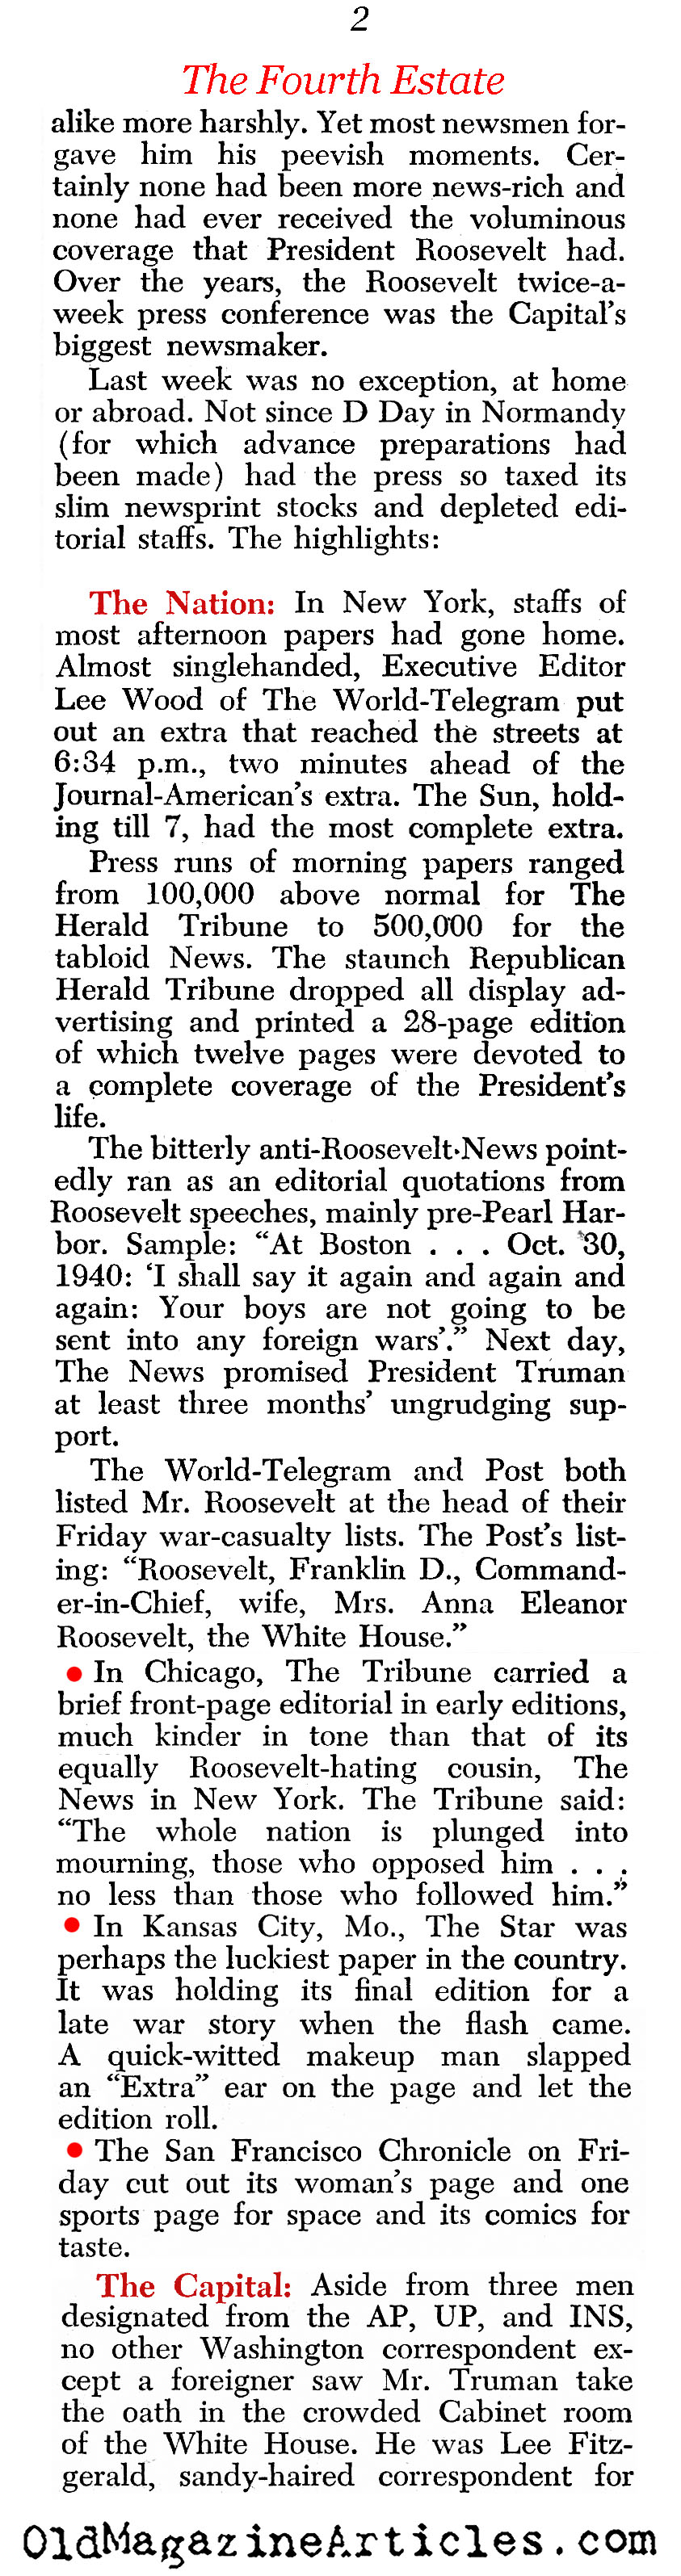 The World Press and the Death of FDR (Newsweek Magazine, 1945)